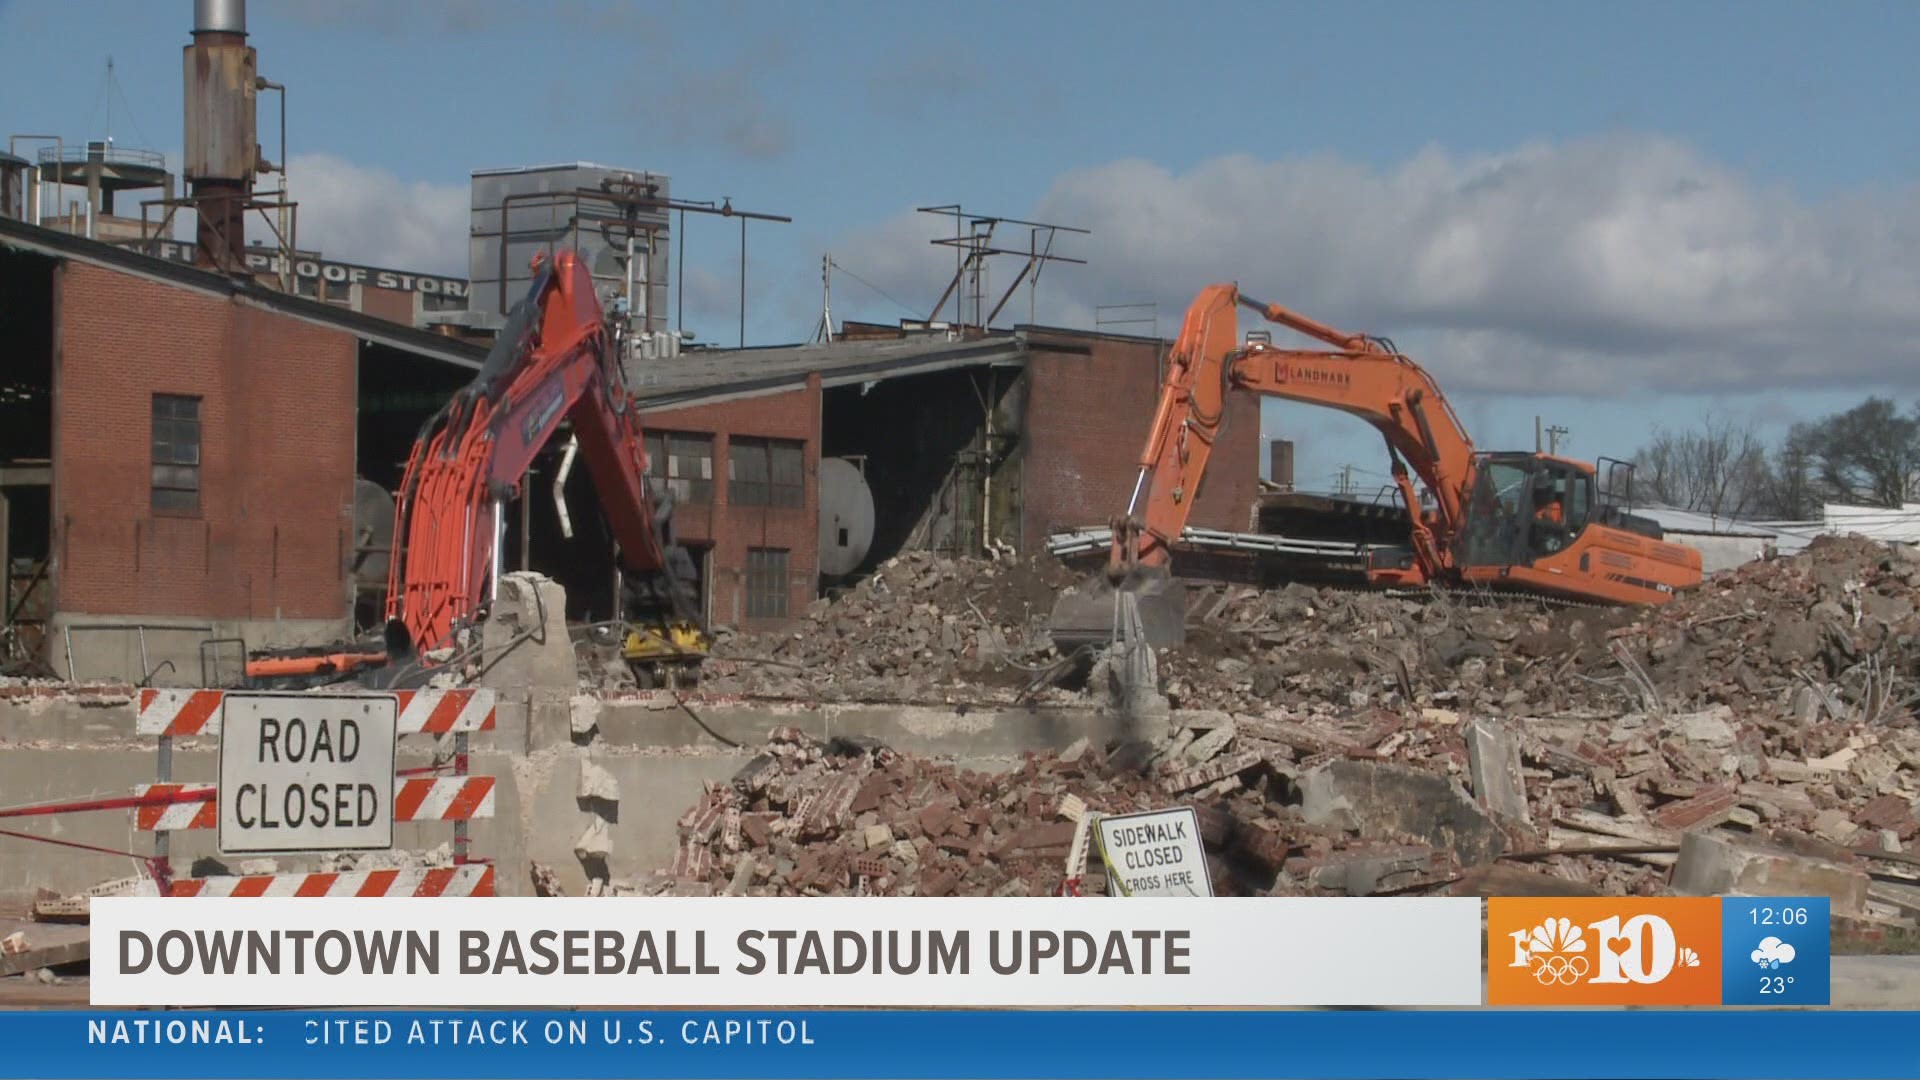 WBIR is taking a closer look this week at plans to build a sports stadium downtown near the Old City.